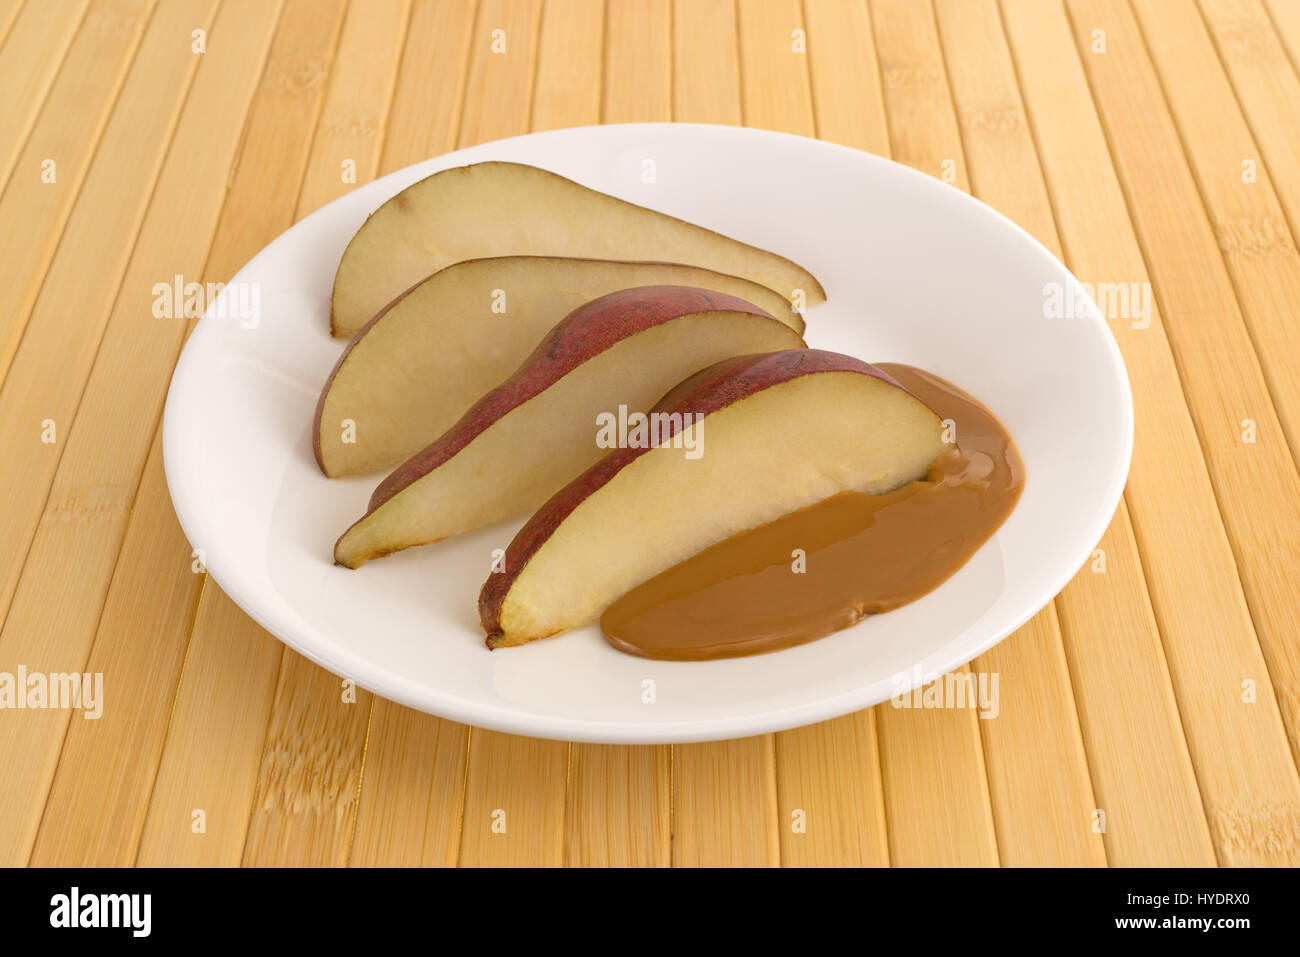 Slices of a red pear on a plate with peanut butter atop a wood plate mat. Stock Photo